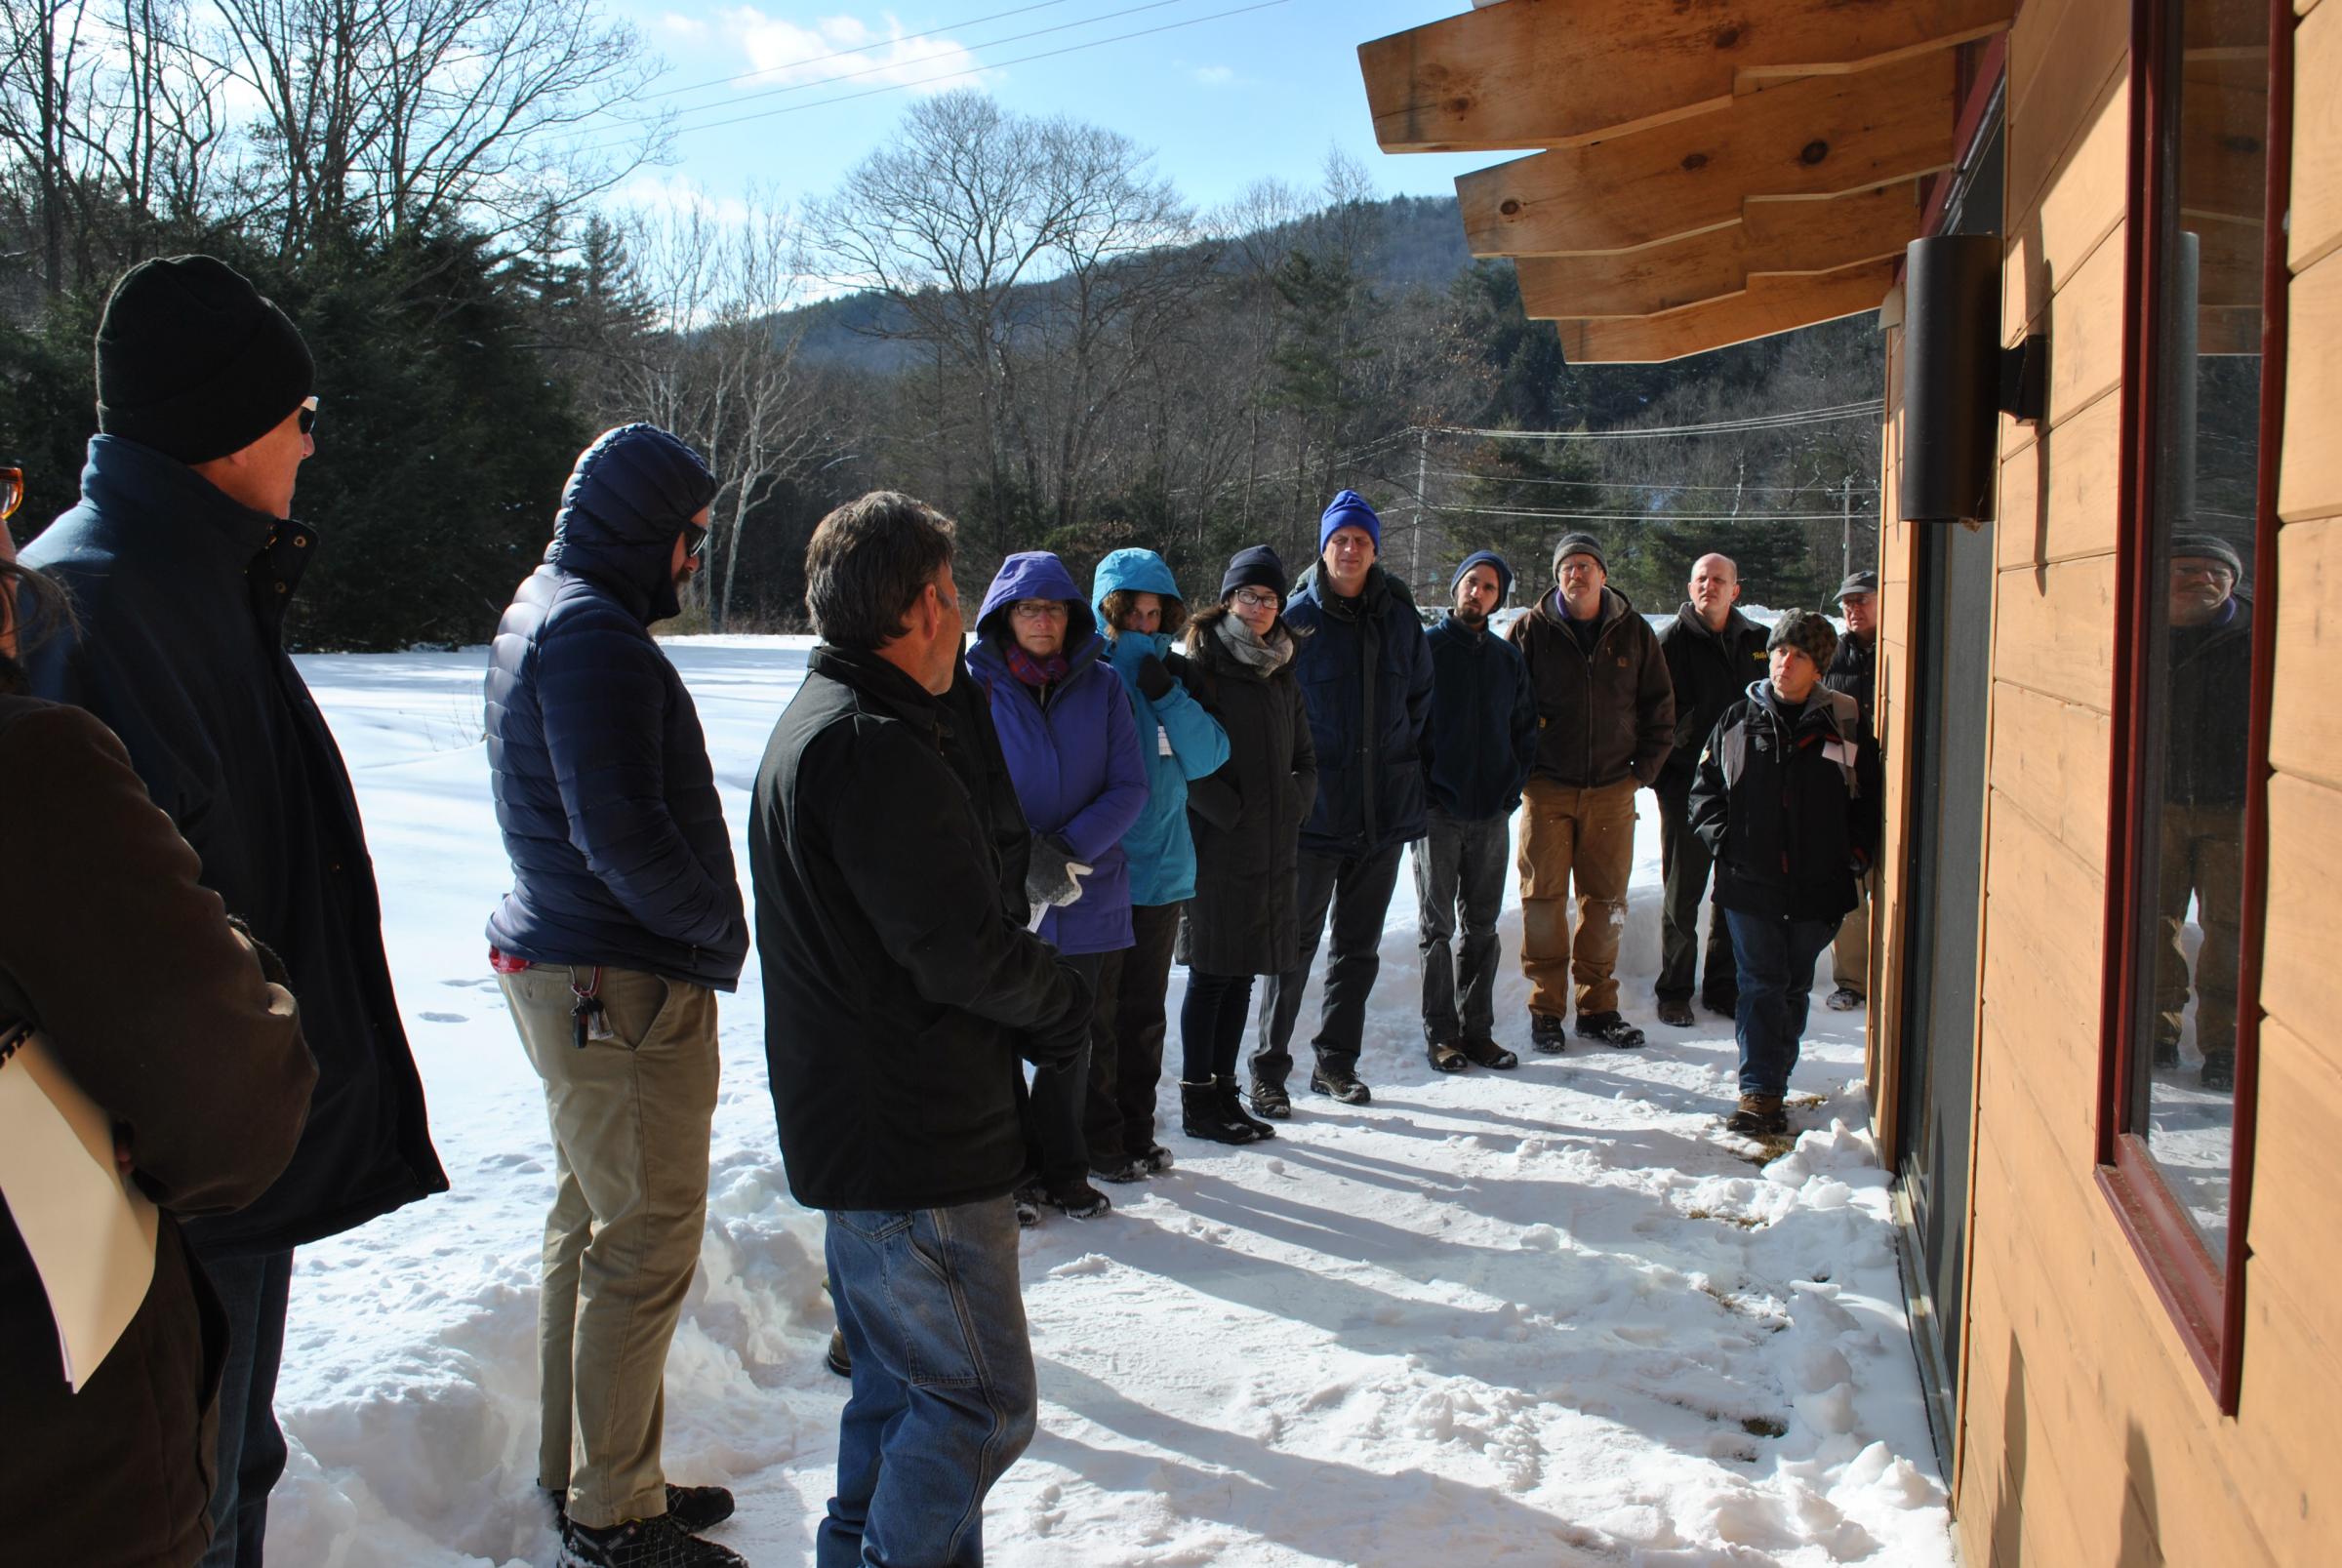 Group standing in a row next to a building during a BuildingEnergy Pro Tour (Caption: BuildingEnergy Pro Tour participants stand next to a building in Colrain, Mass. on Feb. 6, 2015.) 